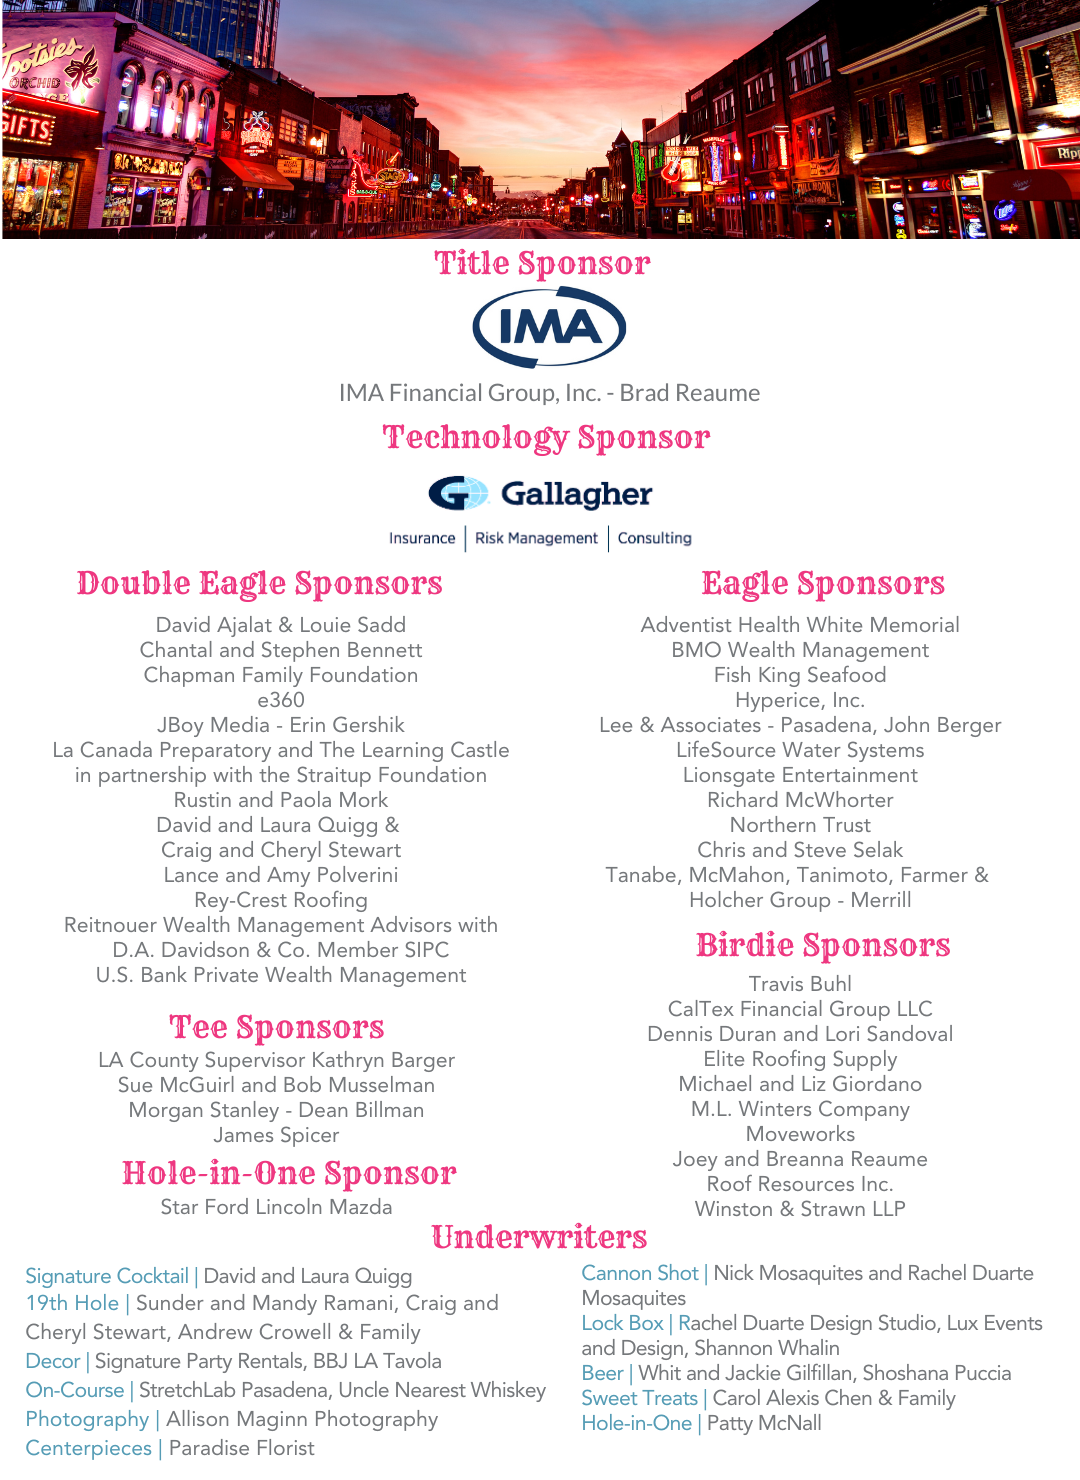 Five Acres Nashville Nights 36th Annual Golf Classic and Dinner list of sponsors and underwriters